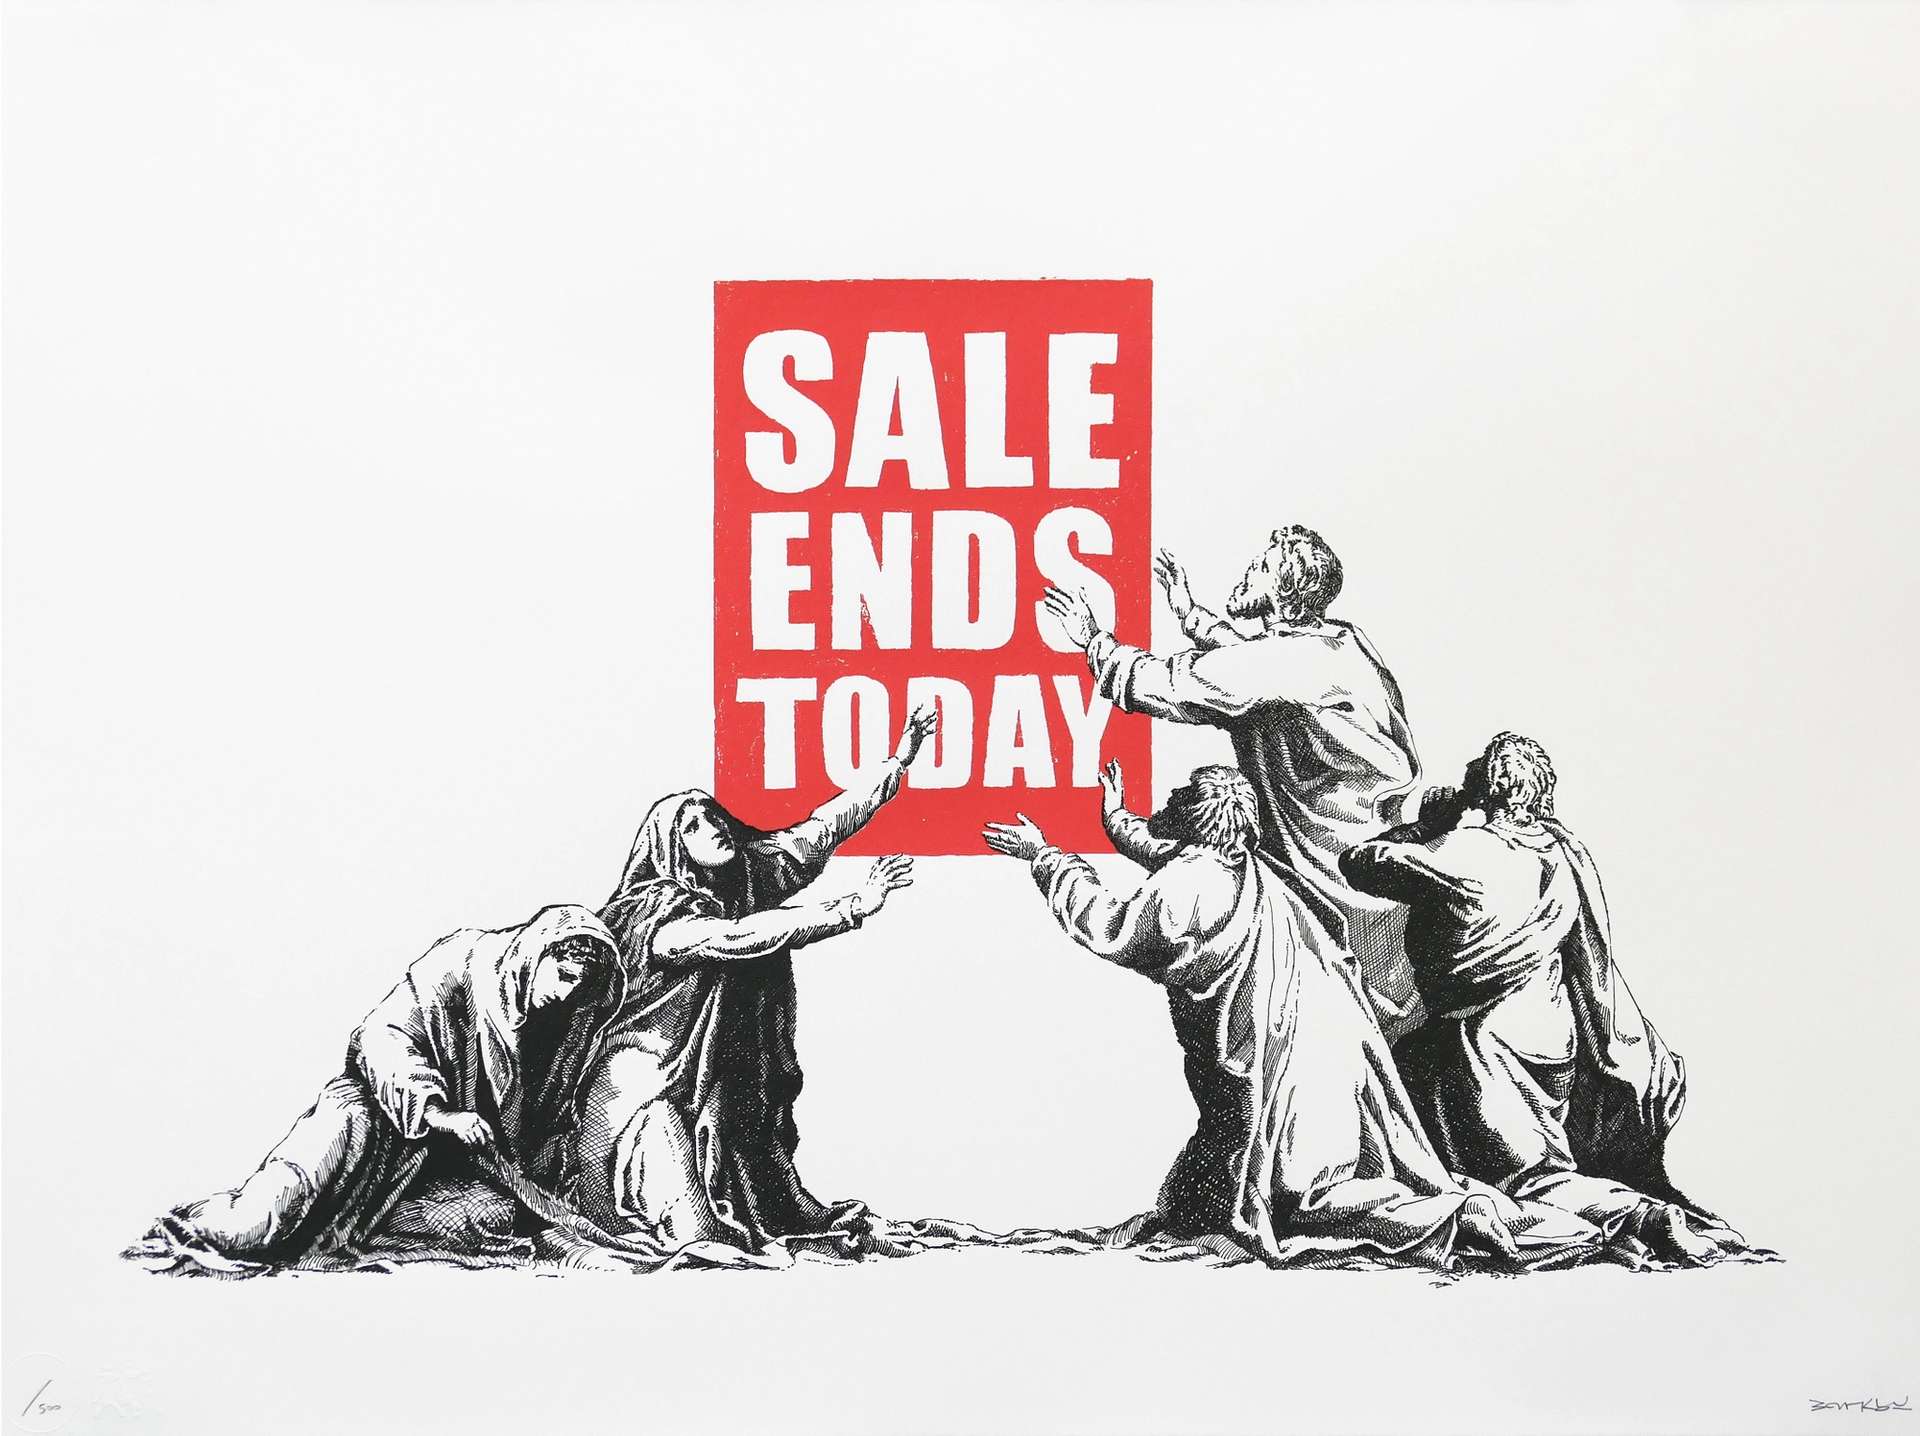 A screenprint by Banksy depicting the lamentation of Christ in black and white, with the figure of Christ replaced by a red sign with white text reading: “SALE ENDS TODAY”